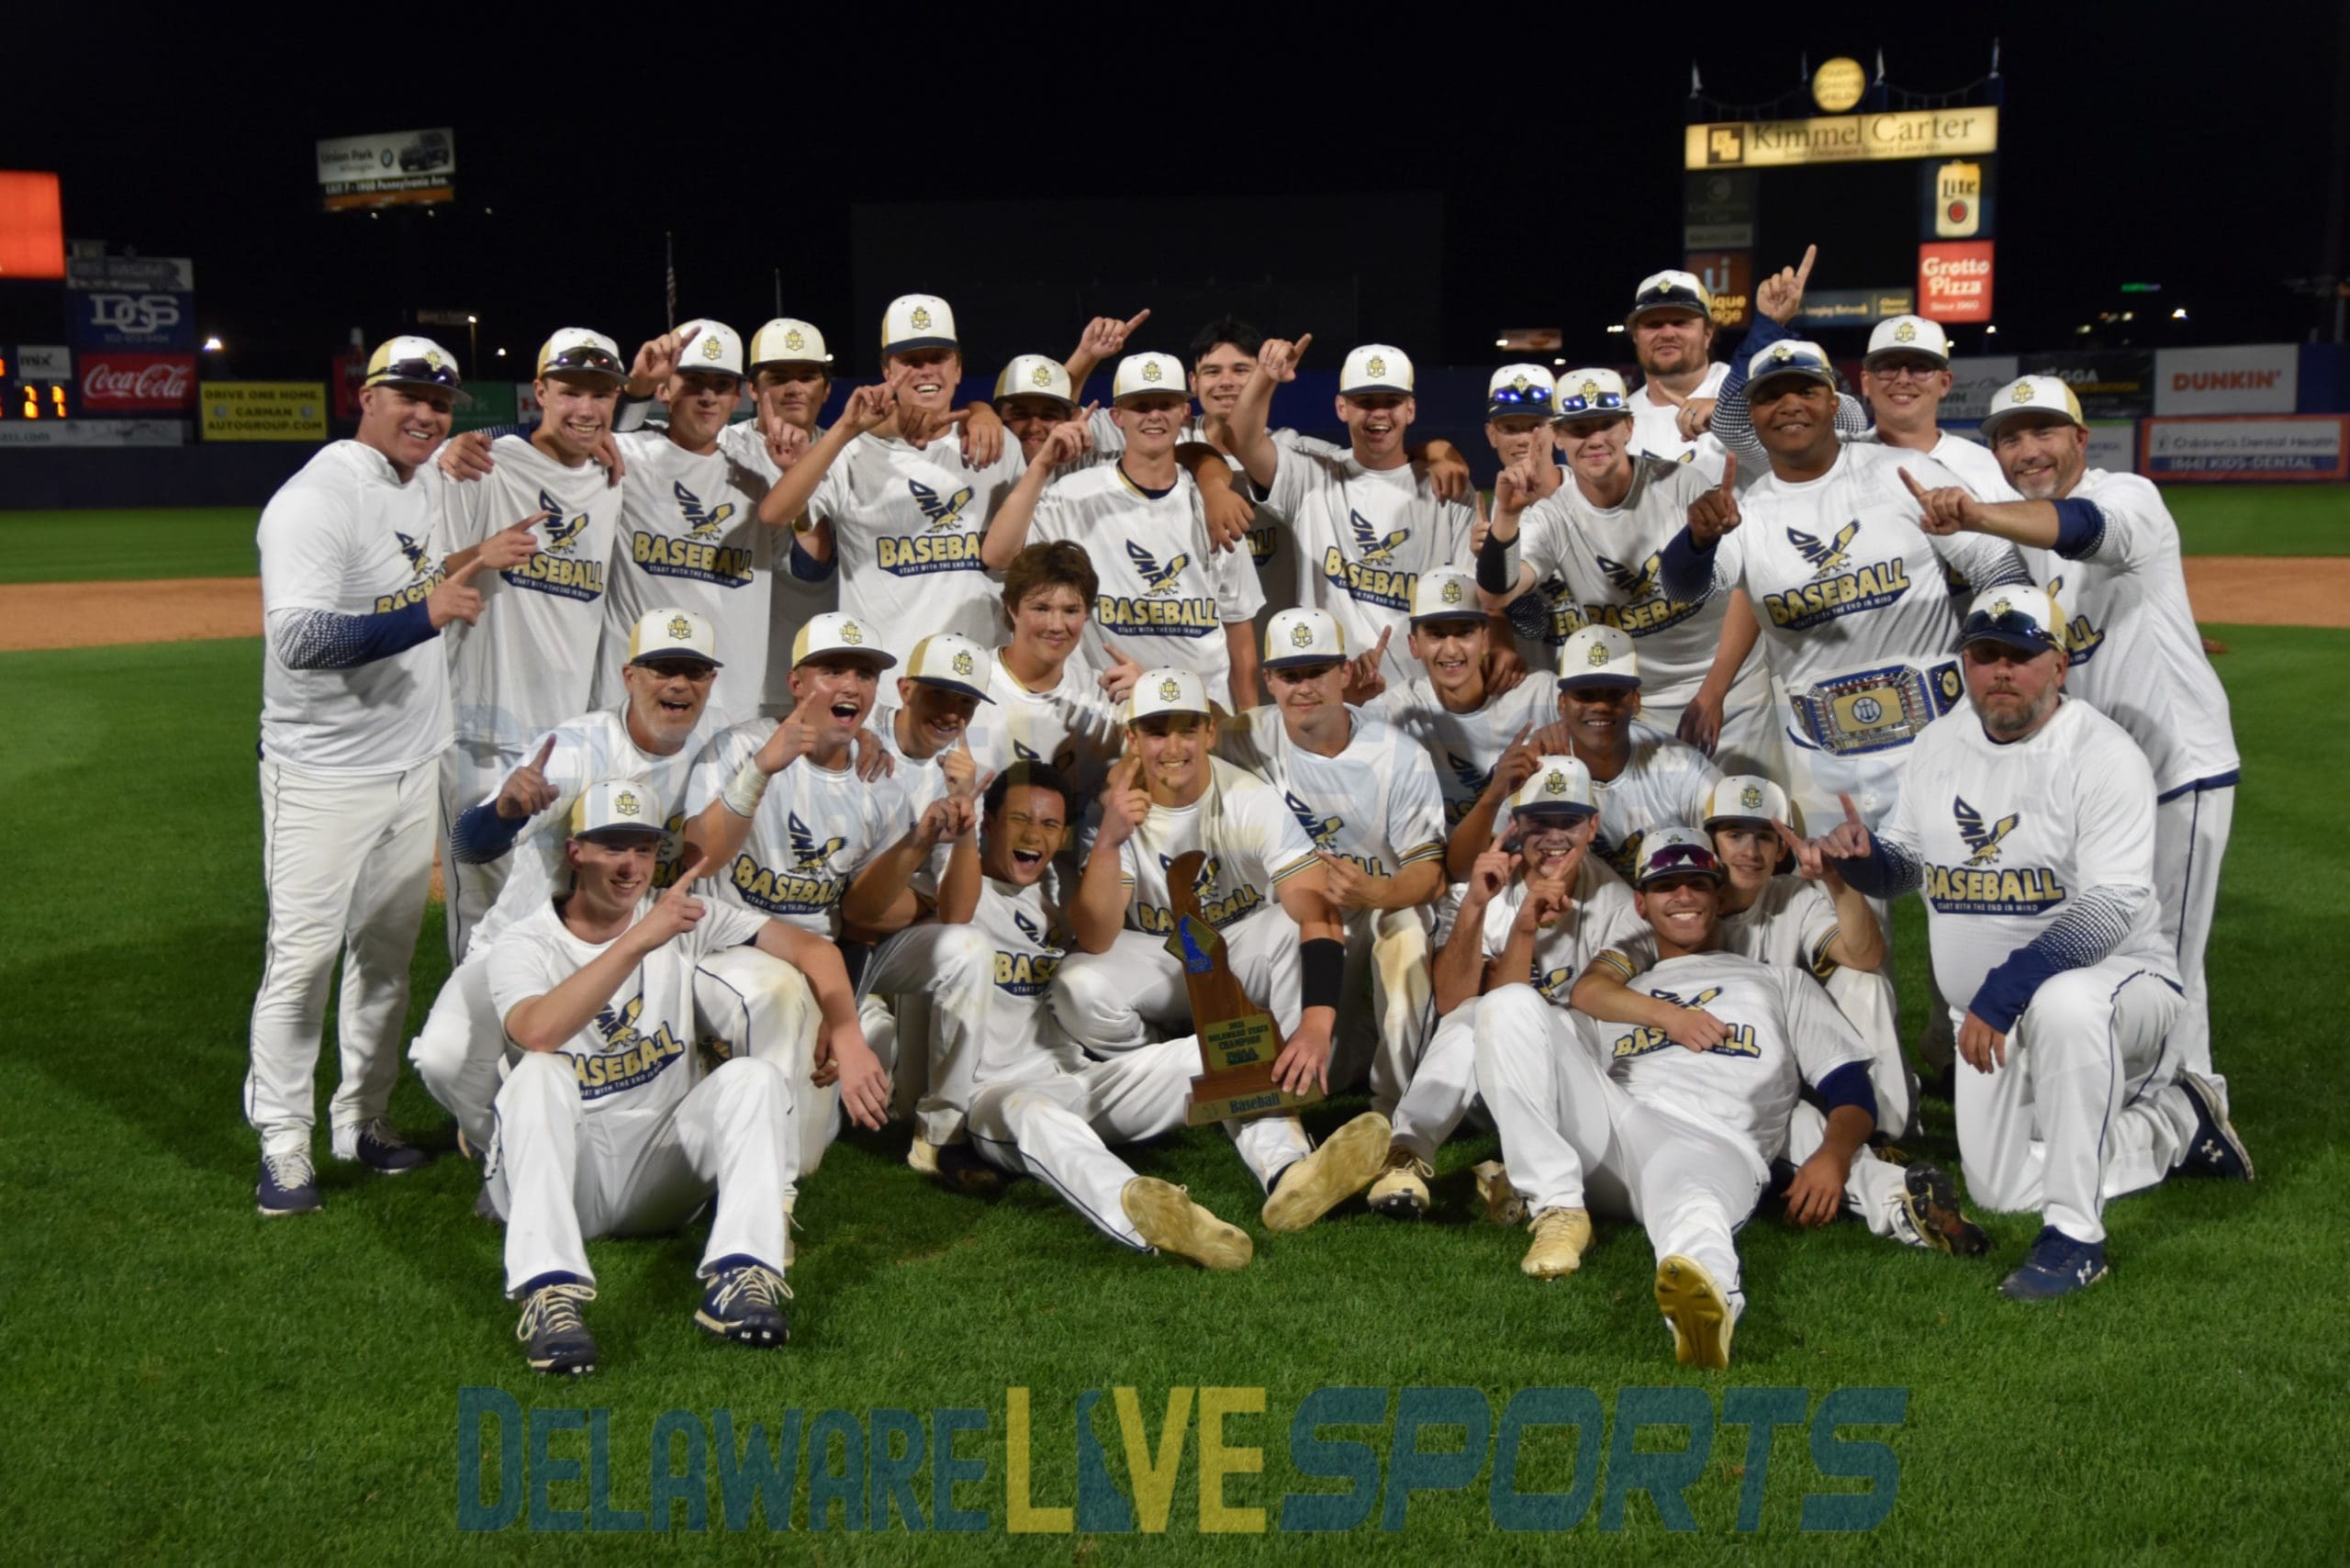 Featured image for “Photos: Delaware Military Academy (DMA) vs Appoquinimink baseball state championship”